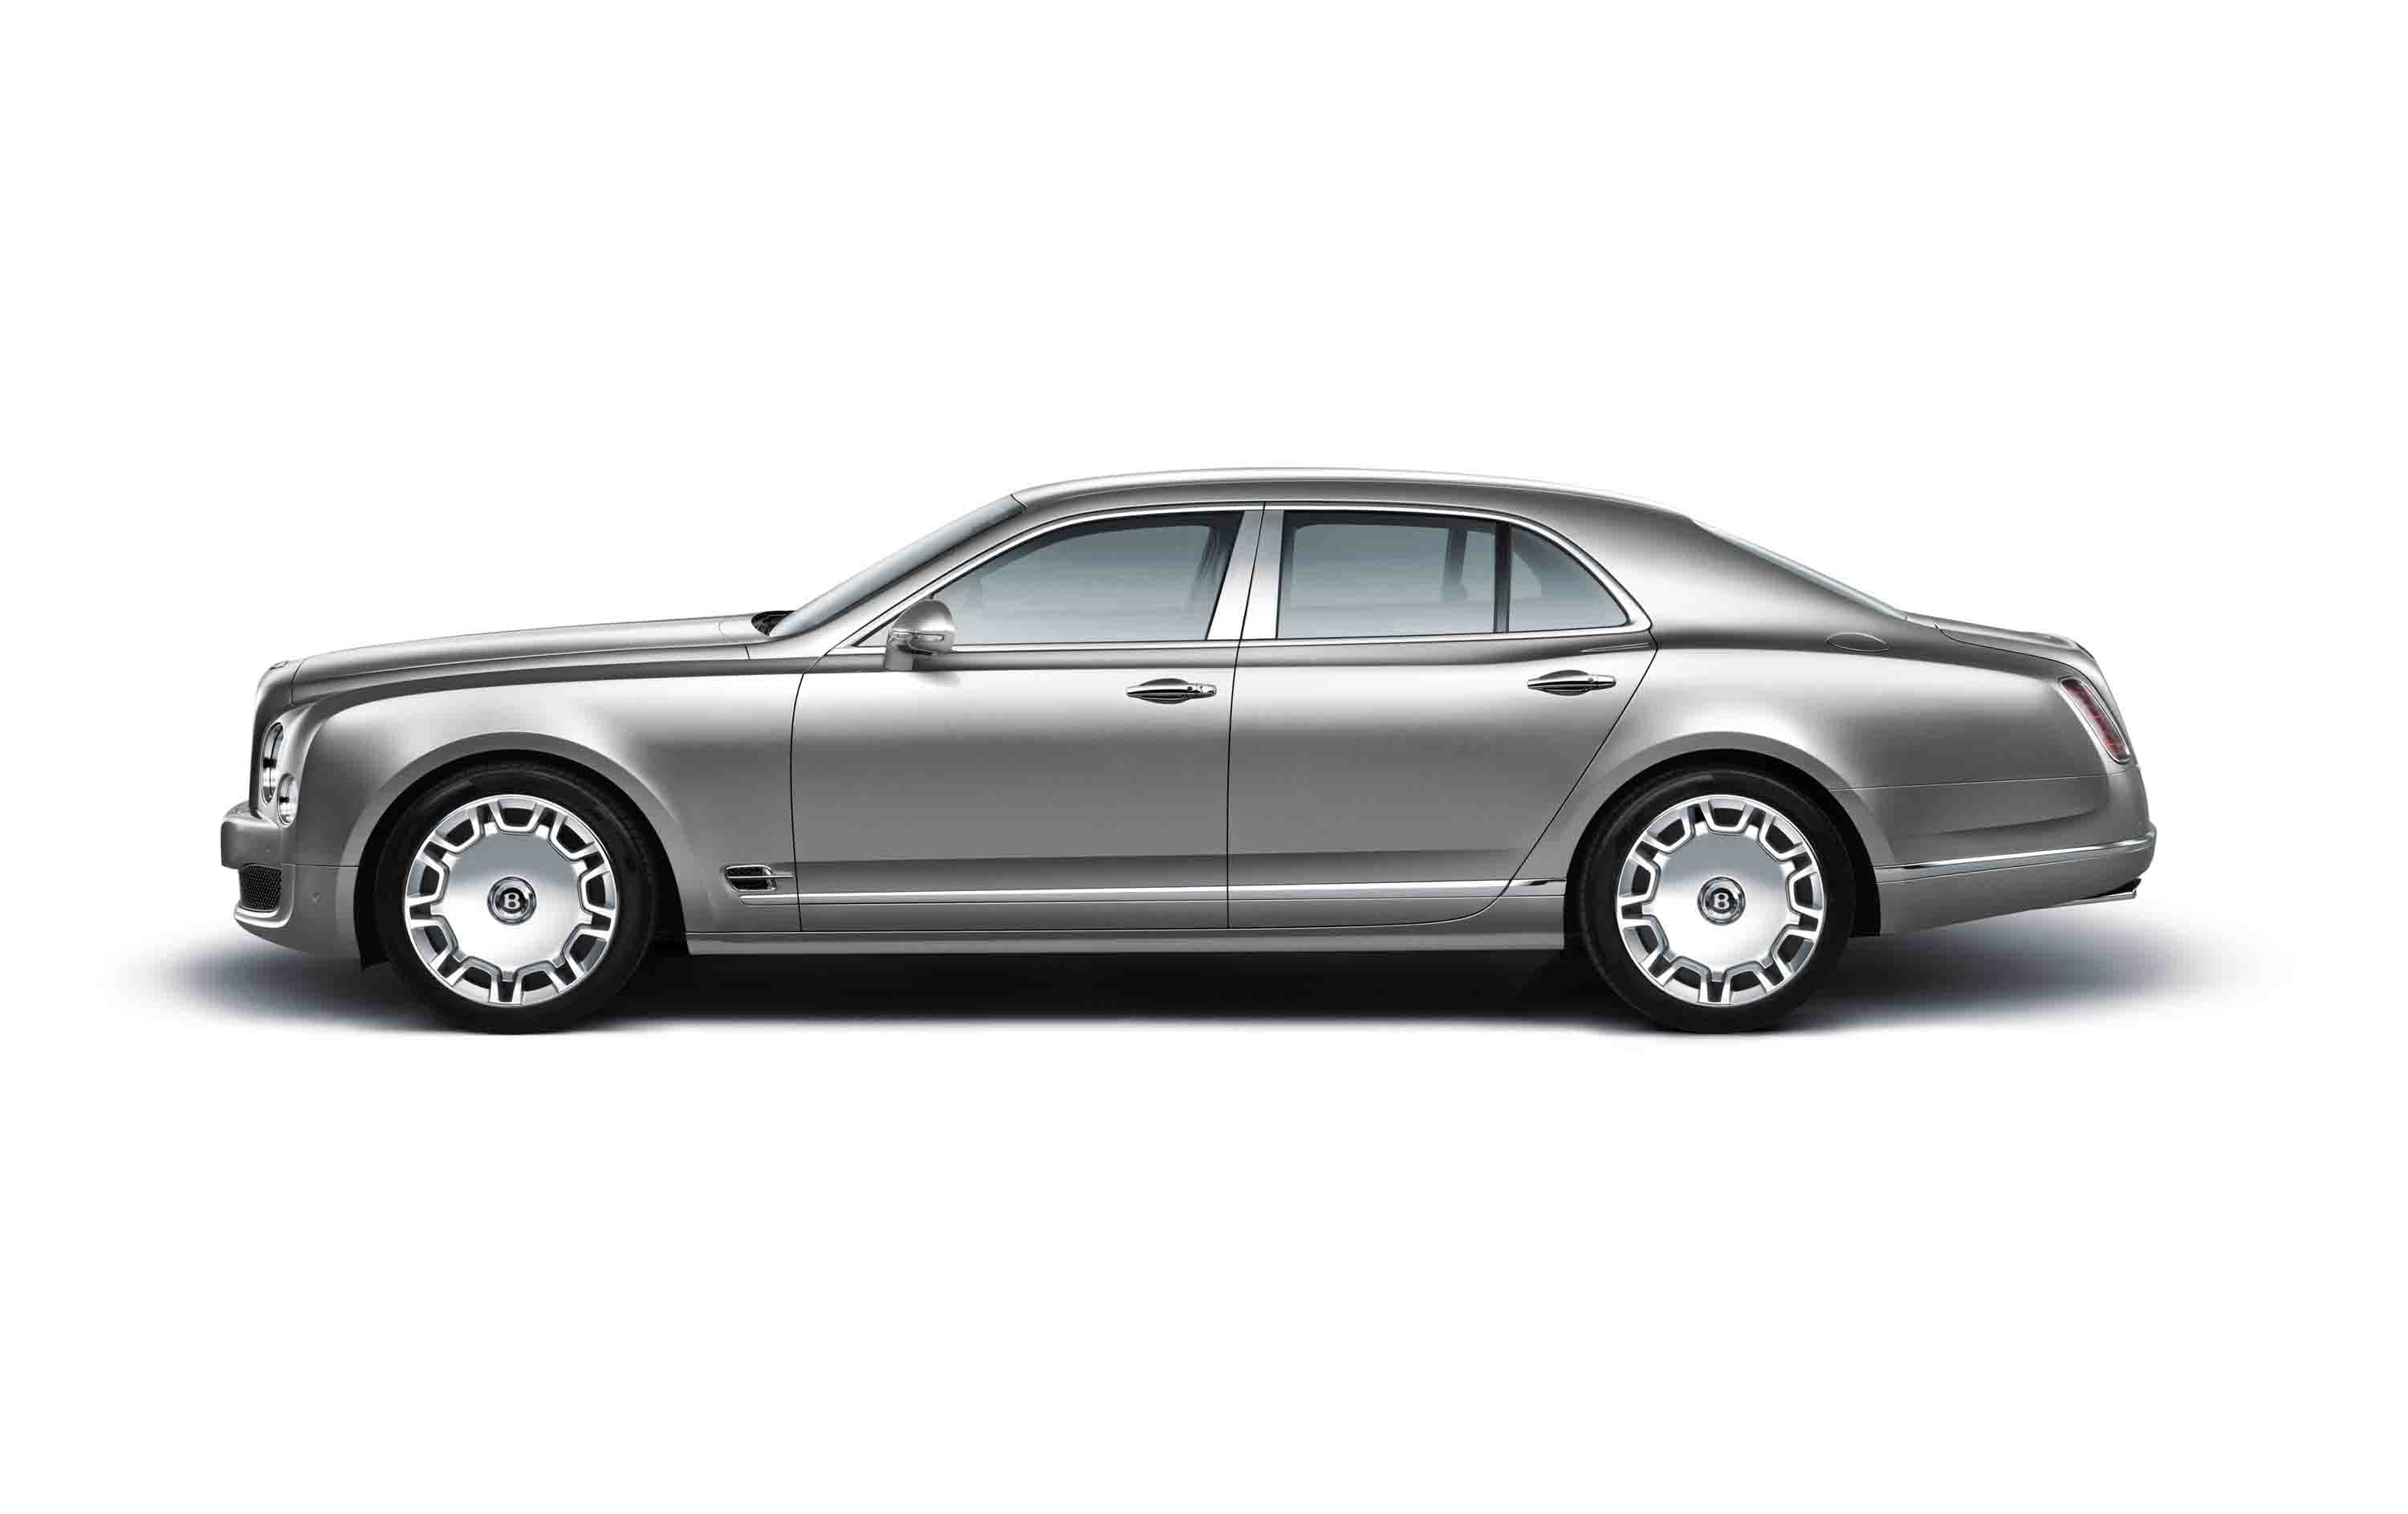 Bentley Mulsanne India, Price, Review, Images  Bentley Cars